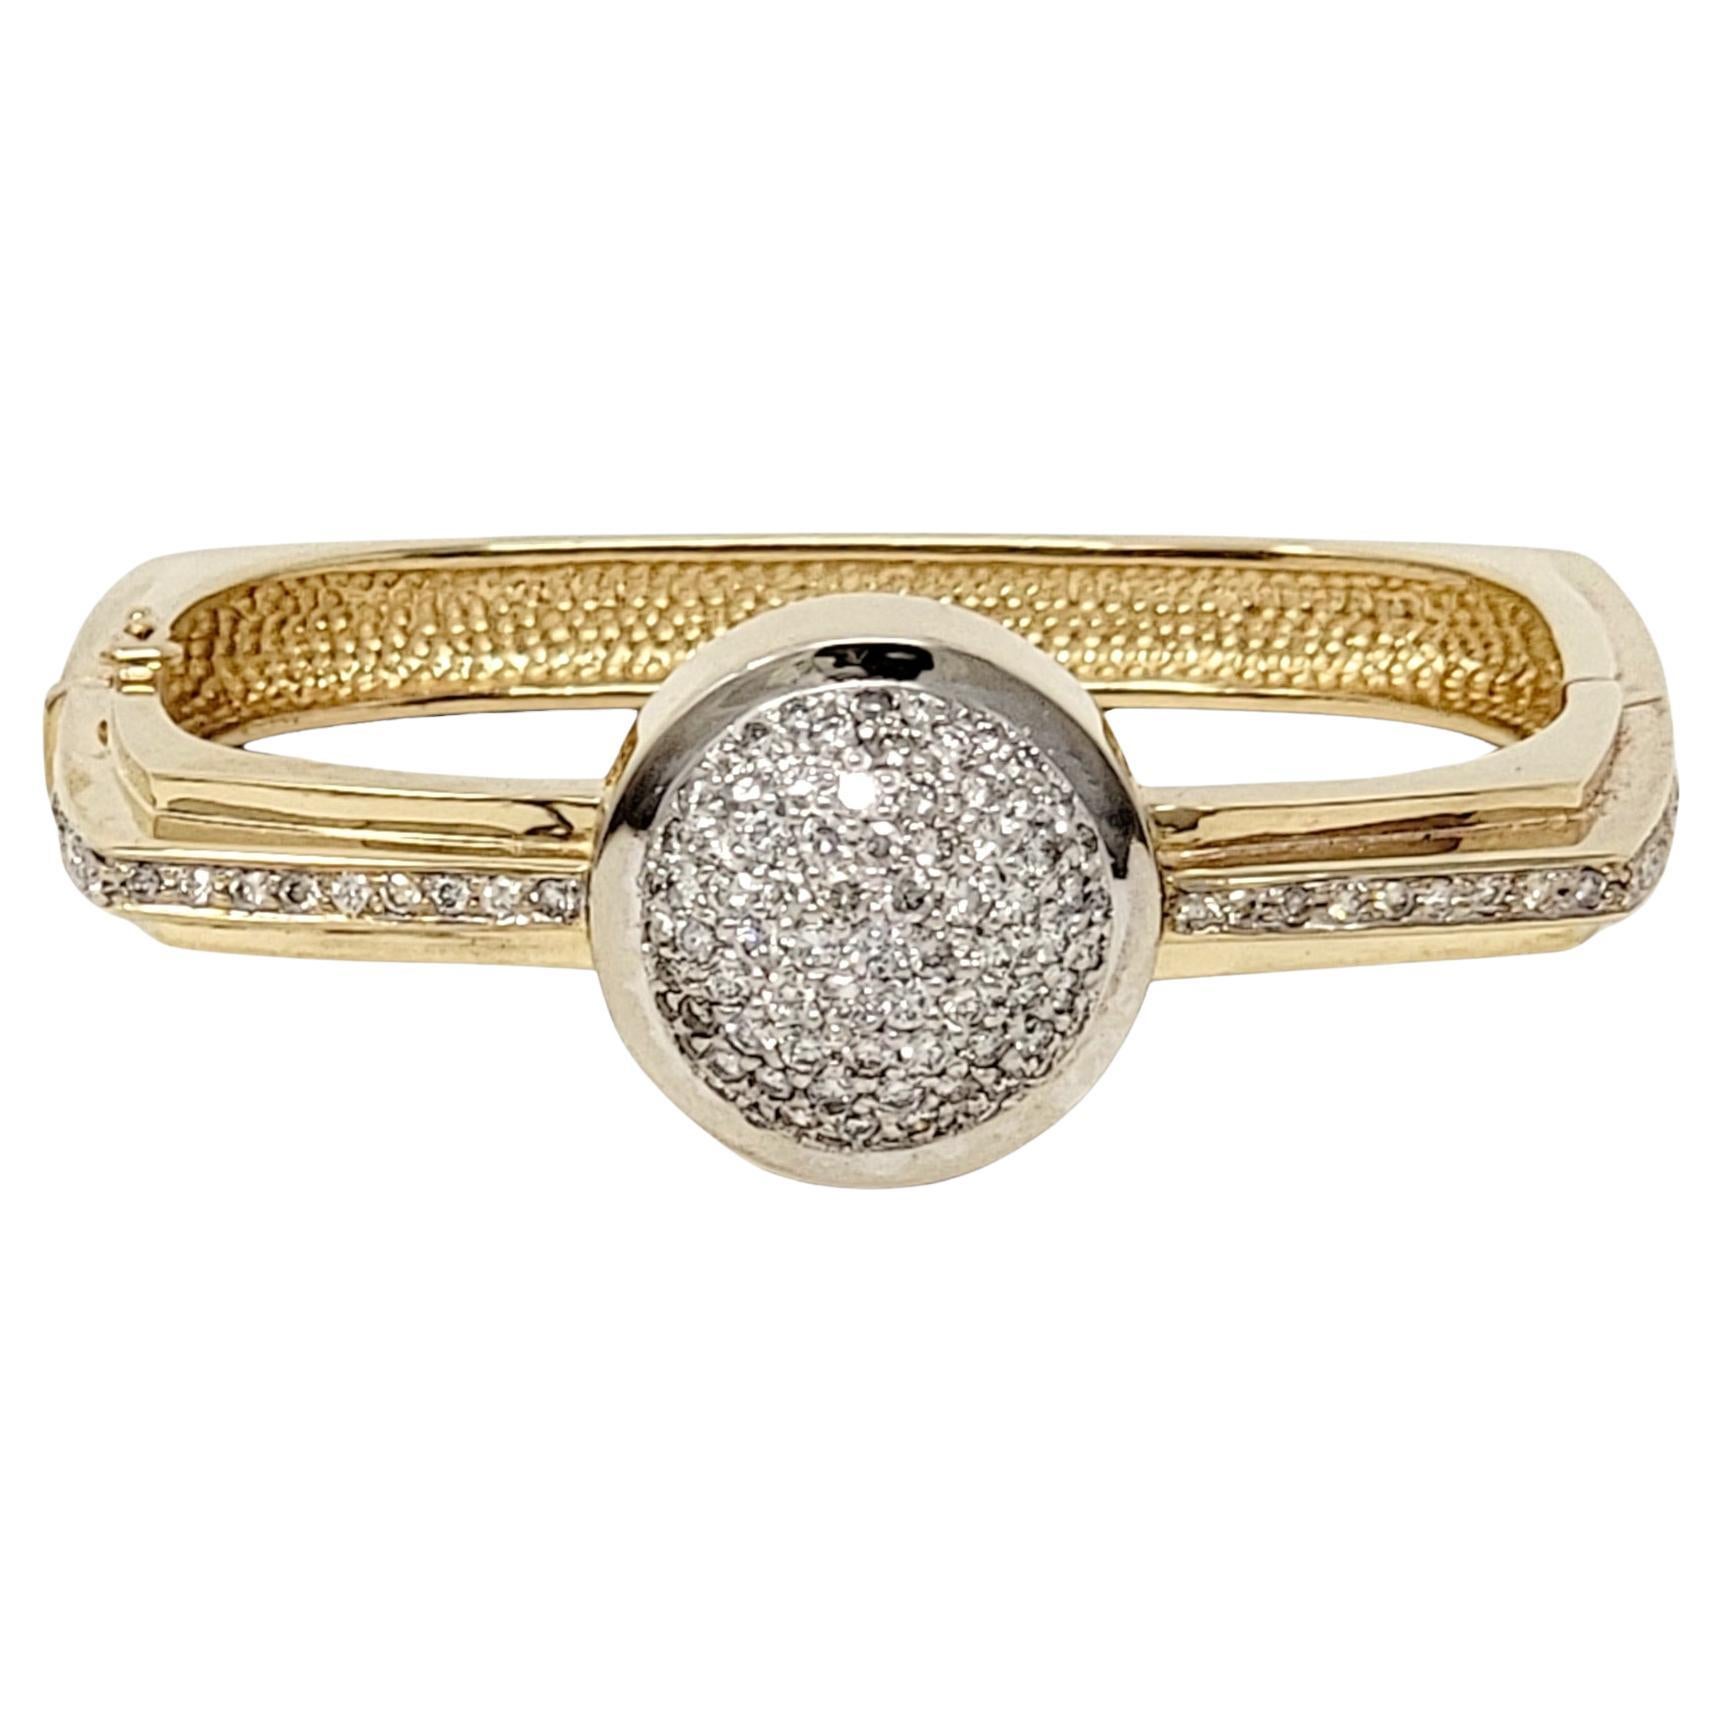 Contemporary Pave Diamond Dome Squared Hinged Bangle Bracelet in 14 Karat Gold